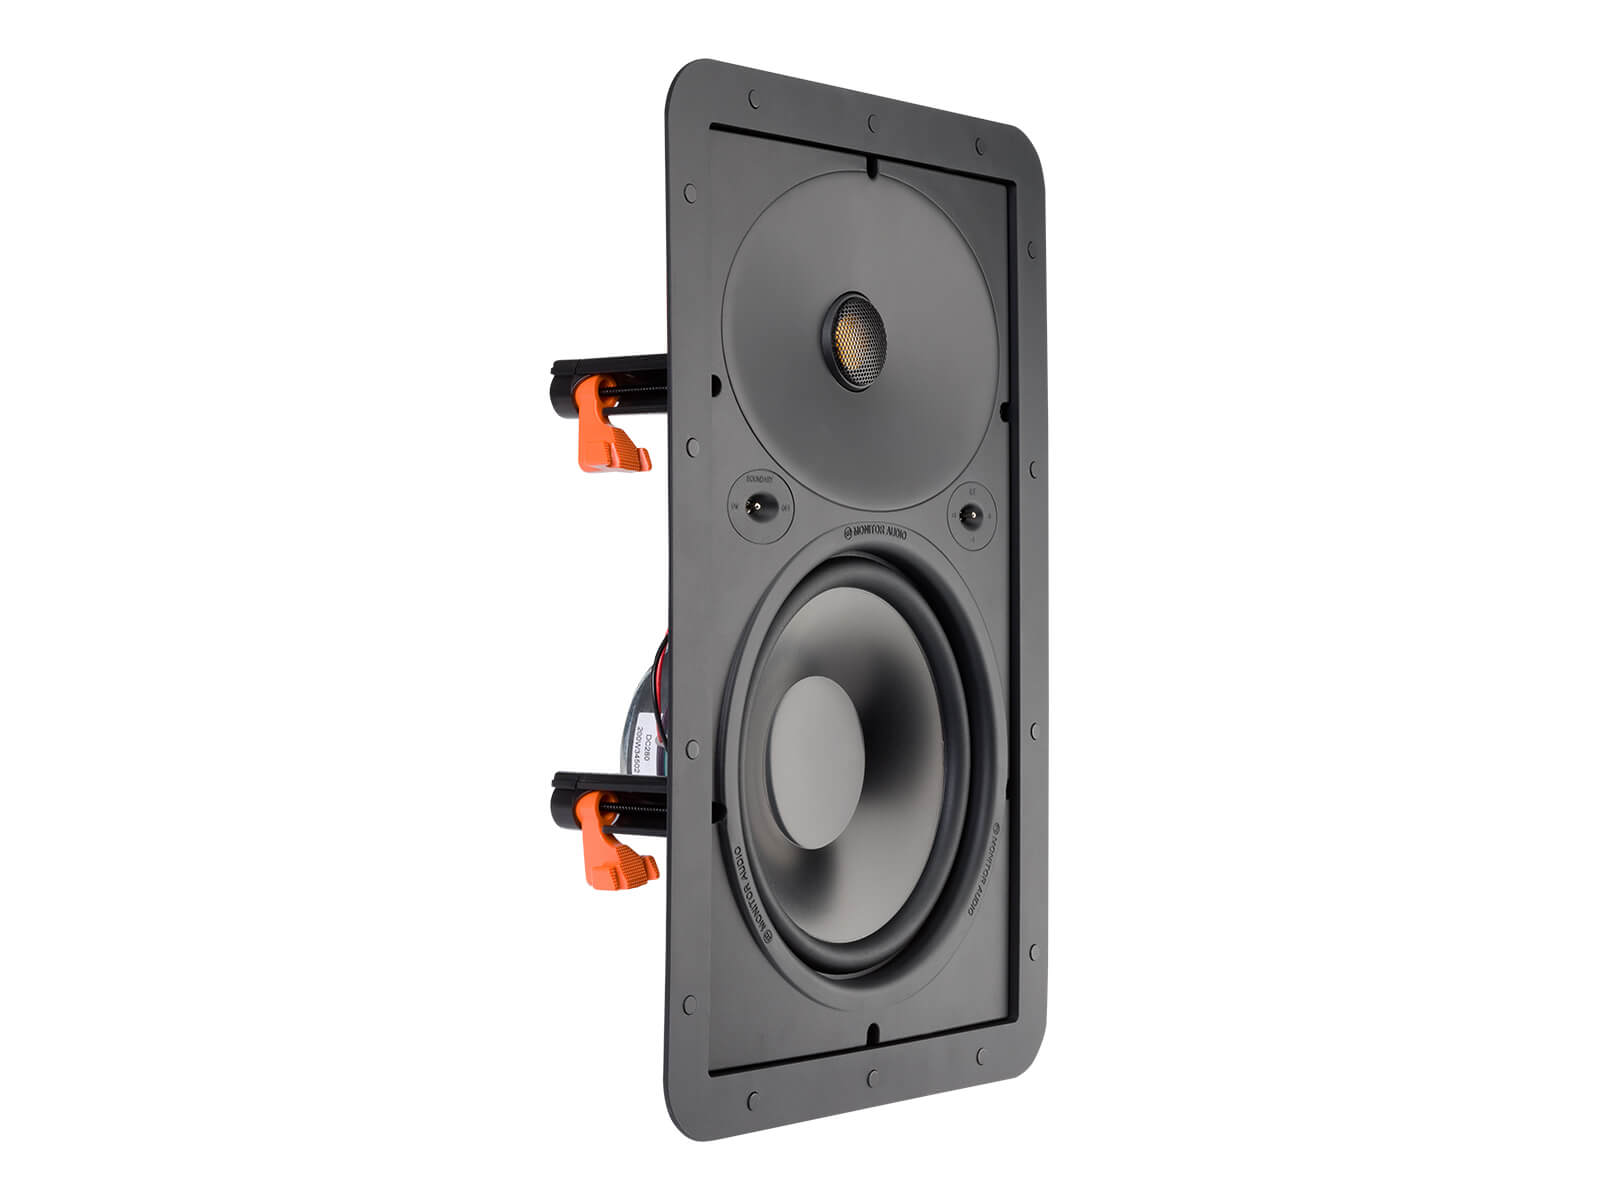 Core W280, front ISO, grille-less in-wall speakers.